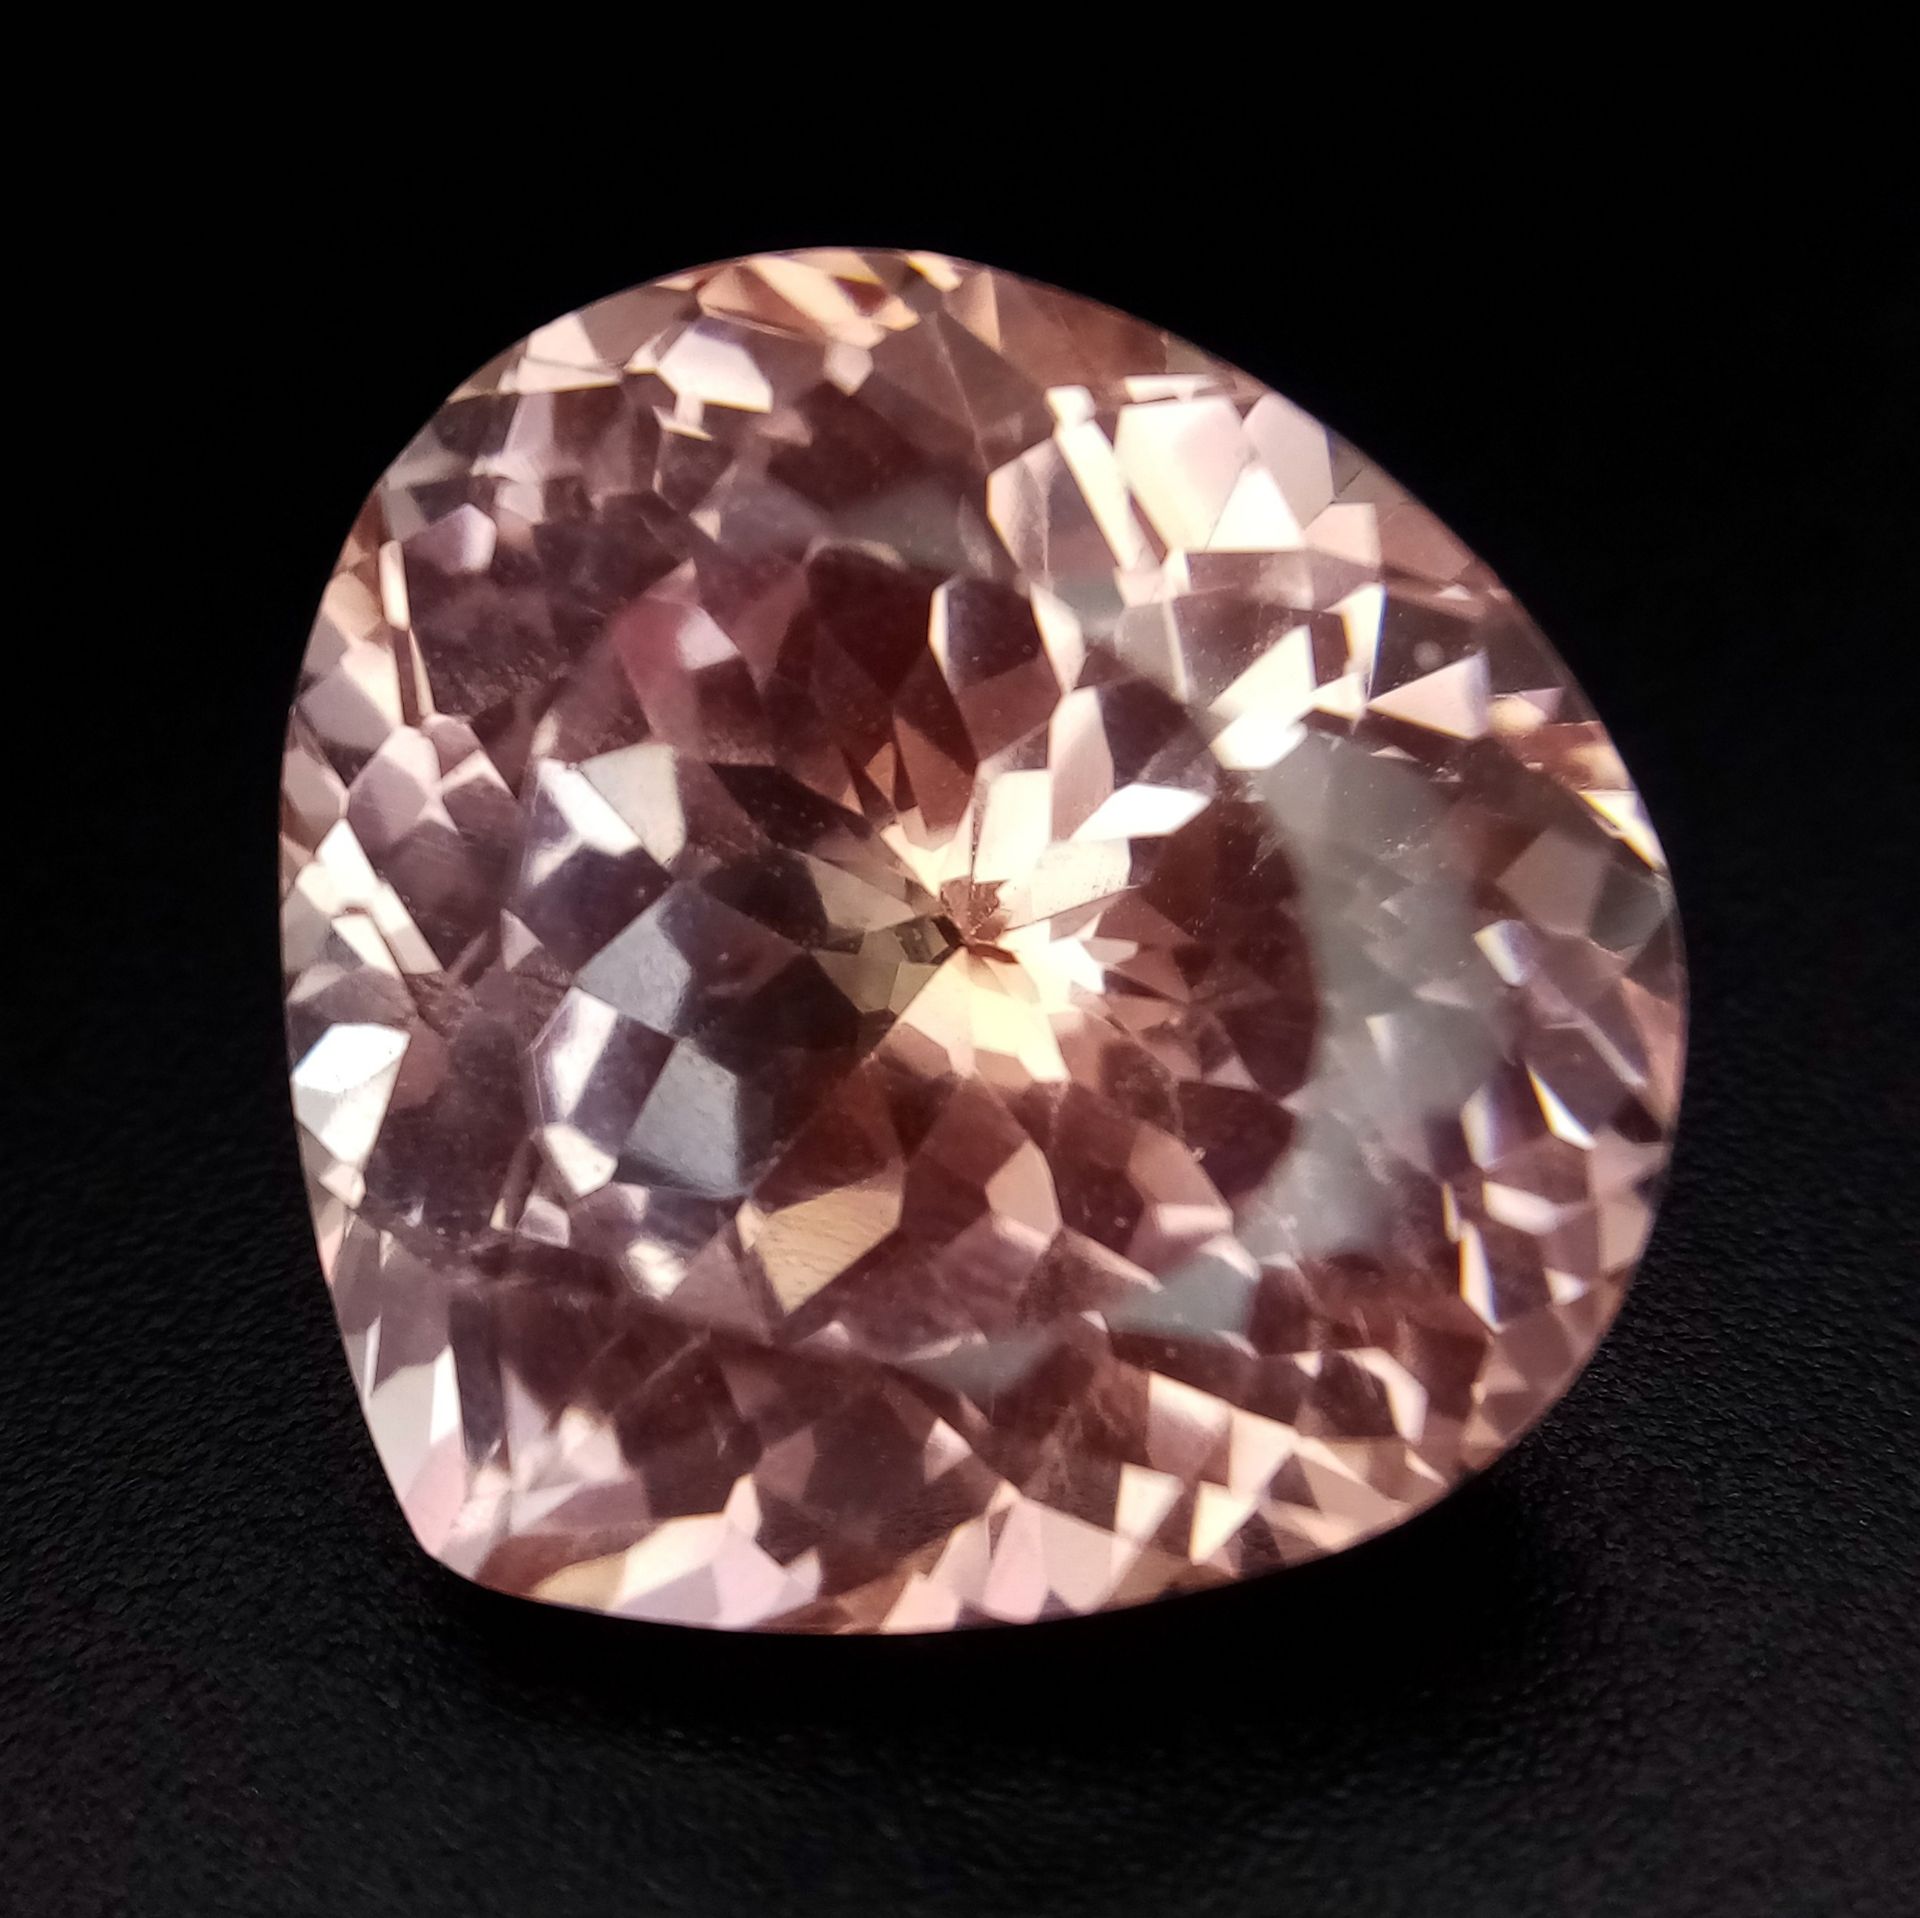 A Beautiful 25ct Heart-Shaped Pink Morganite Gemstone. Beautifully faceted and dances in the